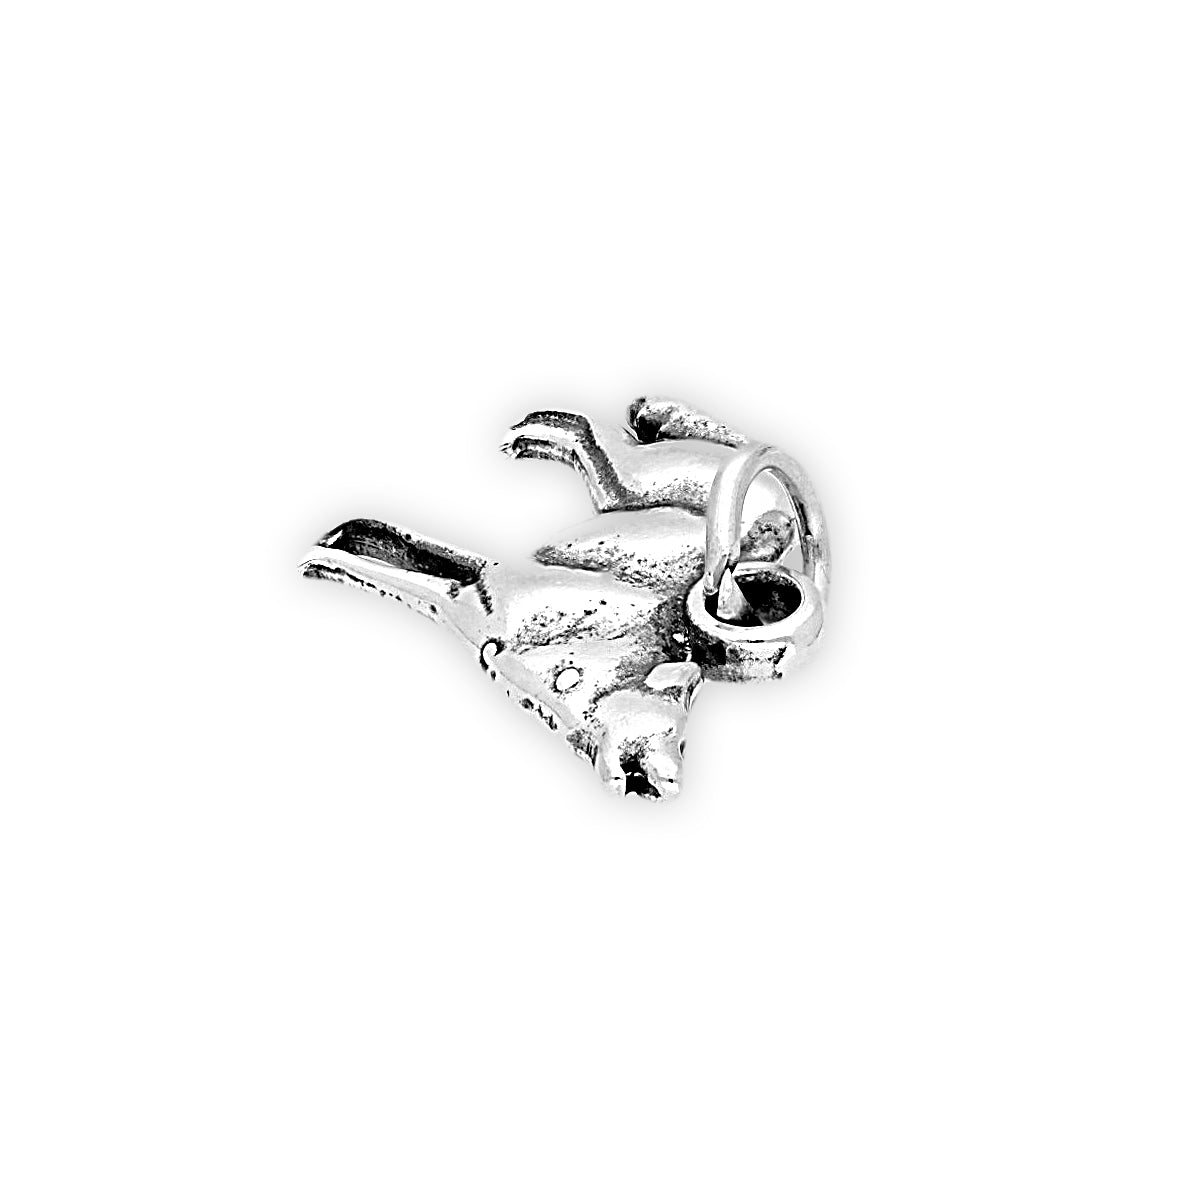 Sterling Silver Howling Wolf Charm